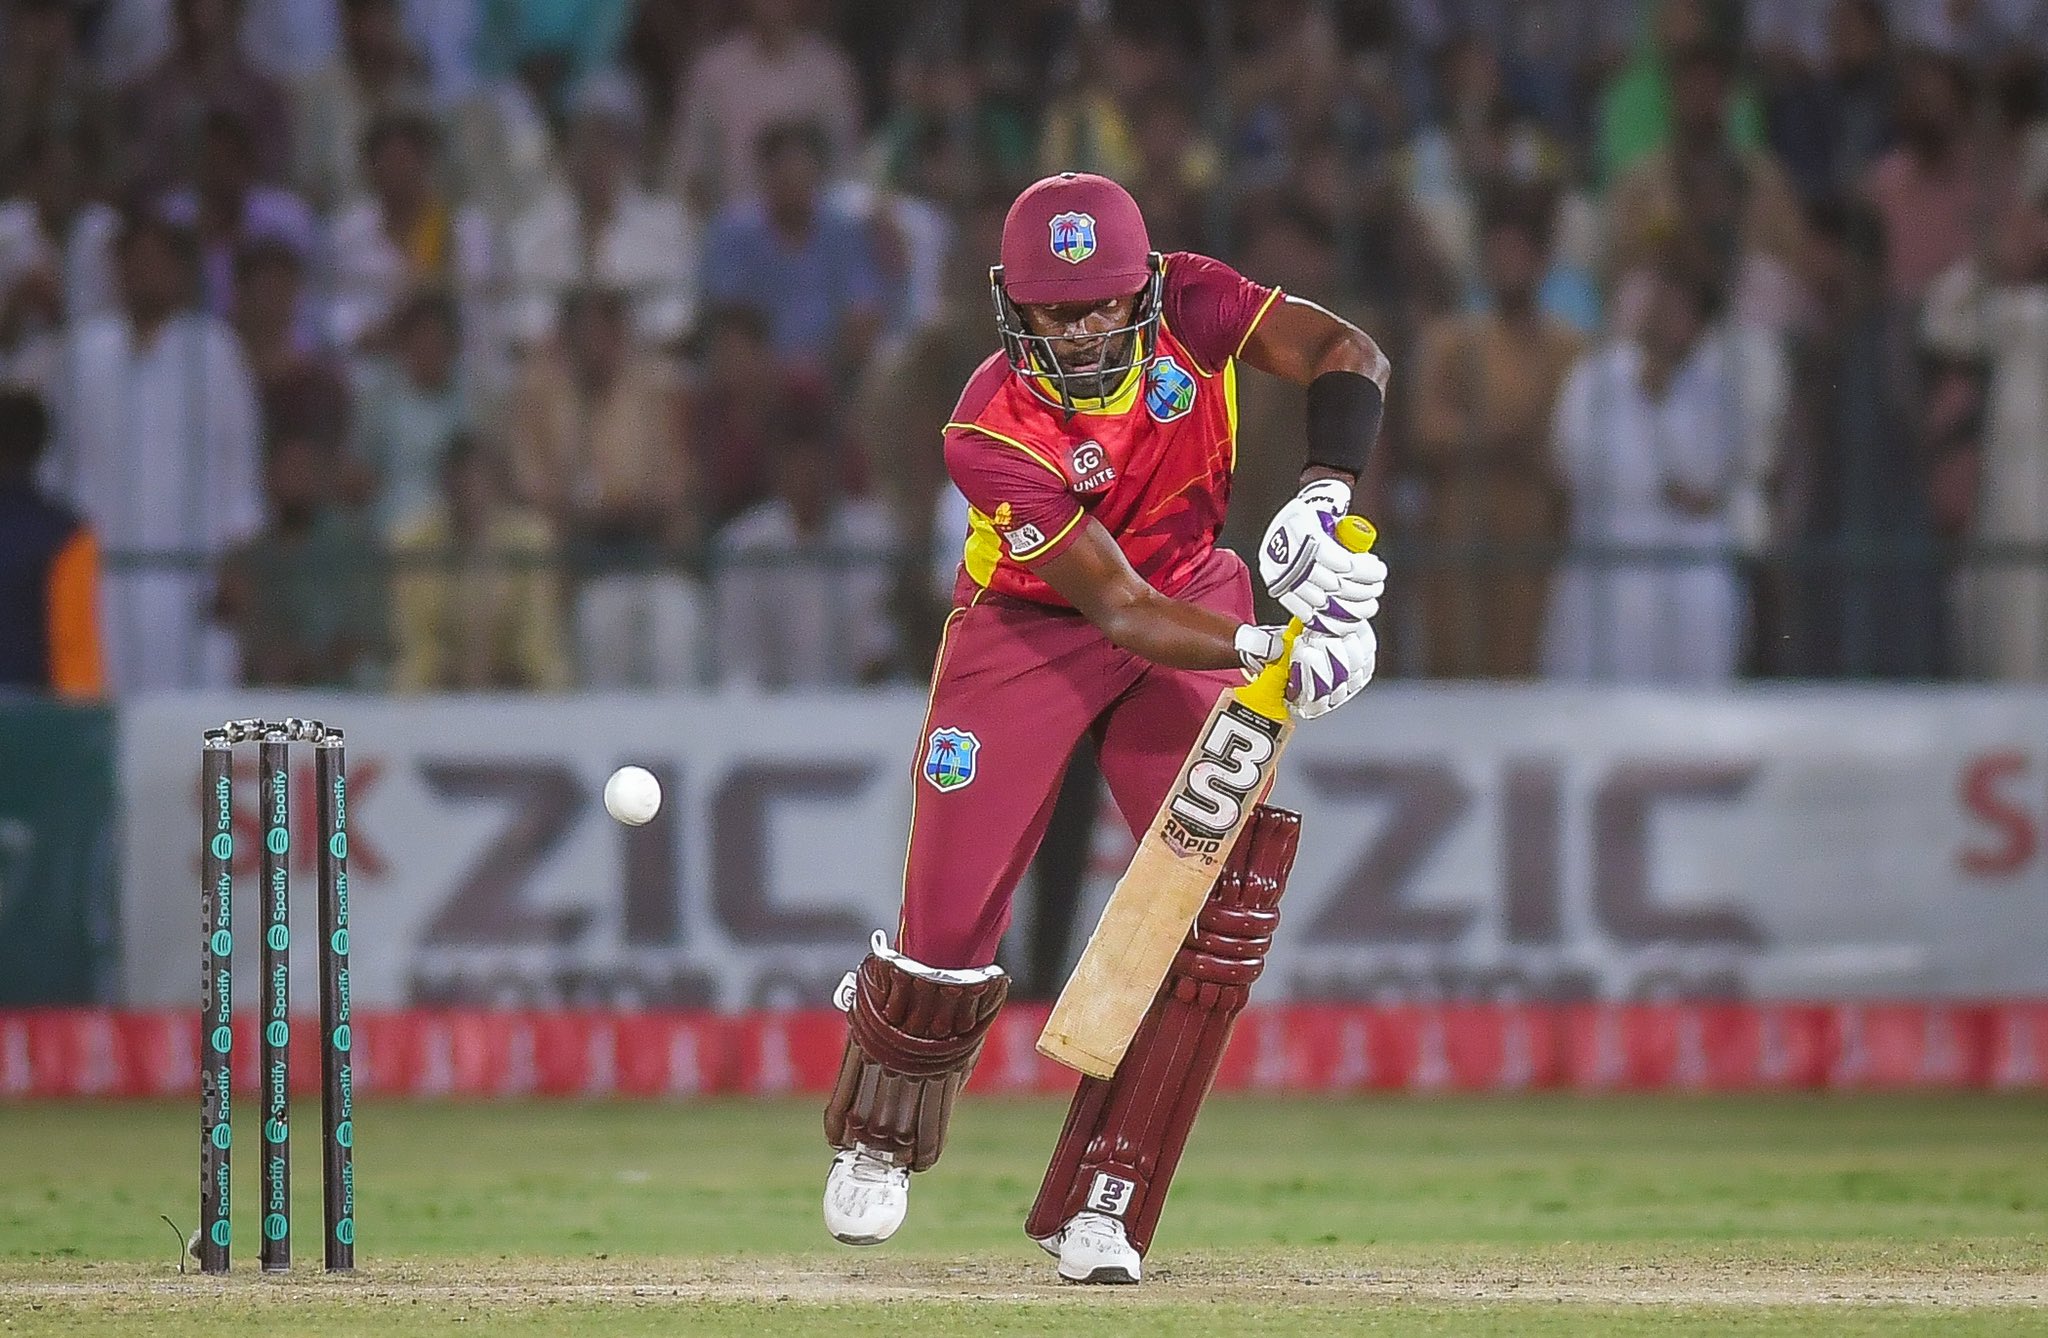 West Indies are looking solid with newly-formed top-order in ODIs